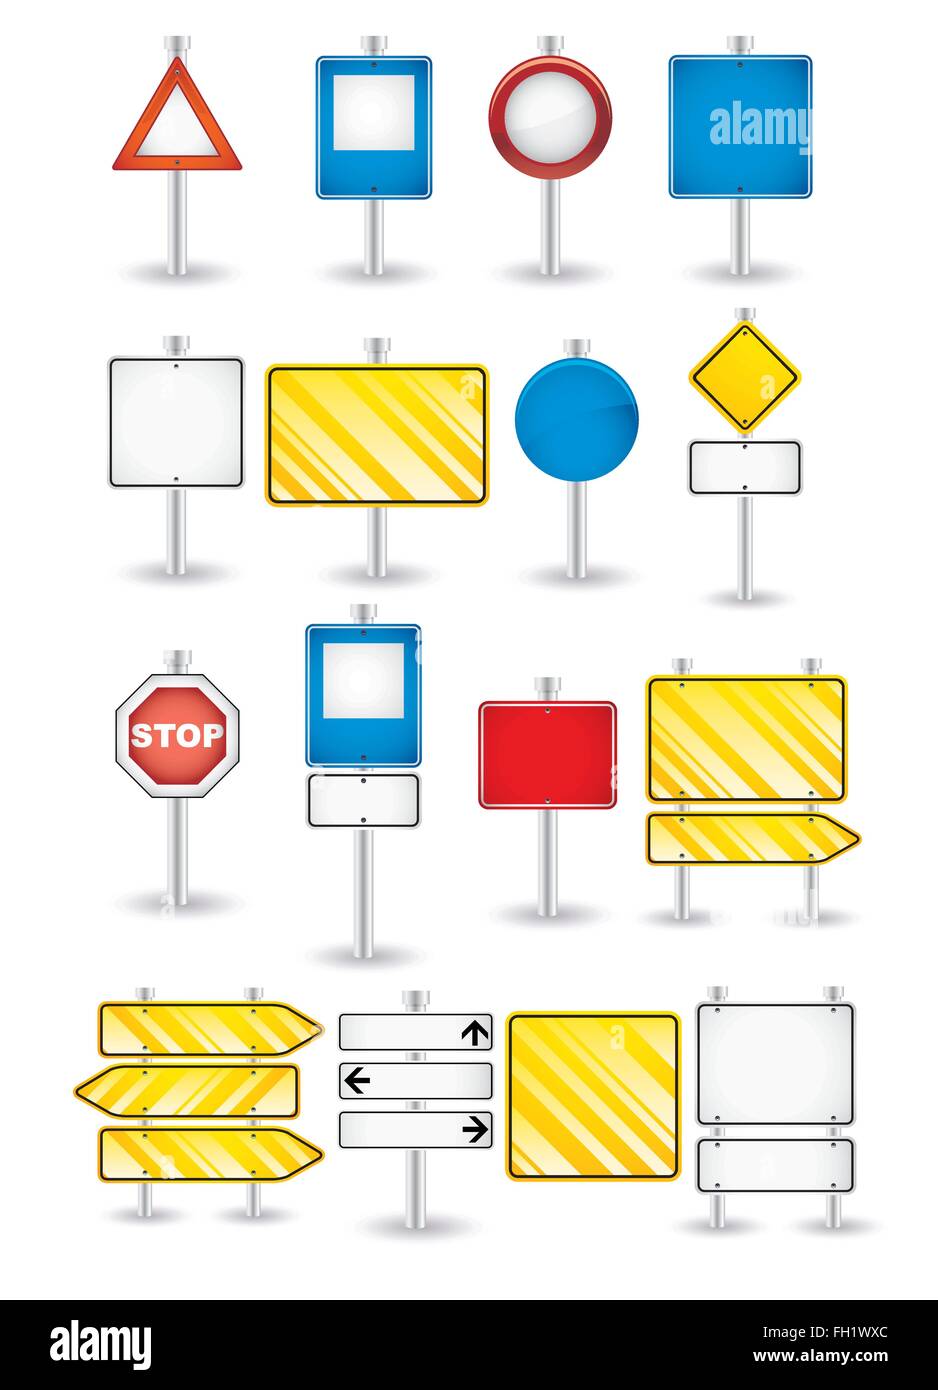 set of road signs Stock Vector